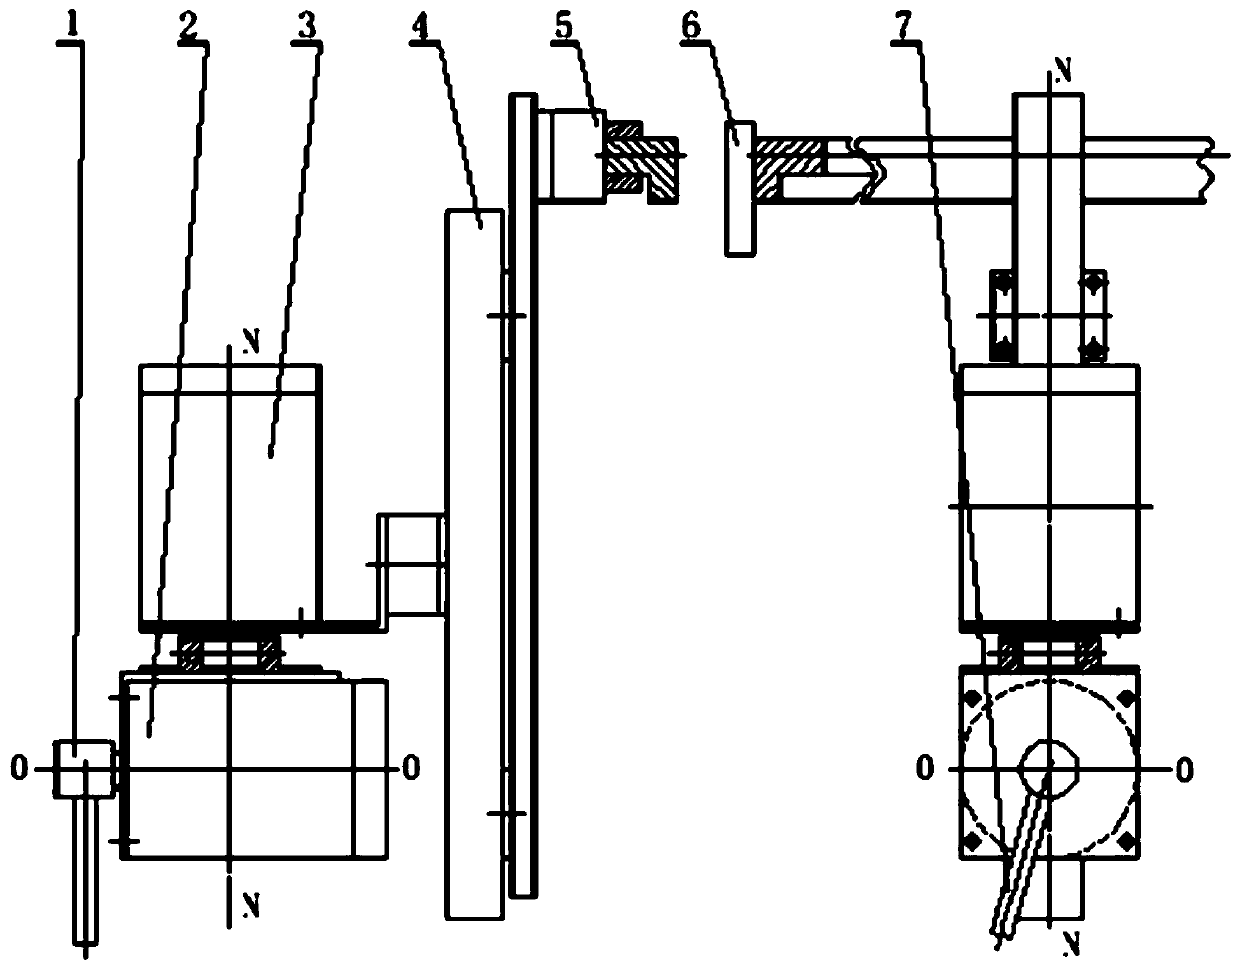 Intelligent cutting fluid follow-up system for machine tool